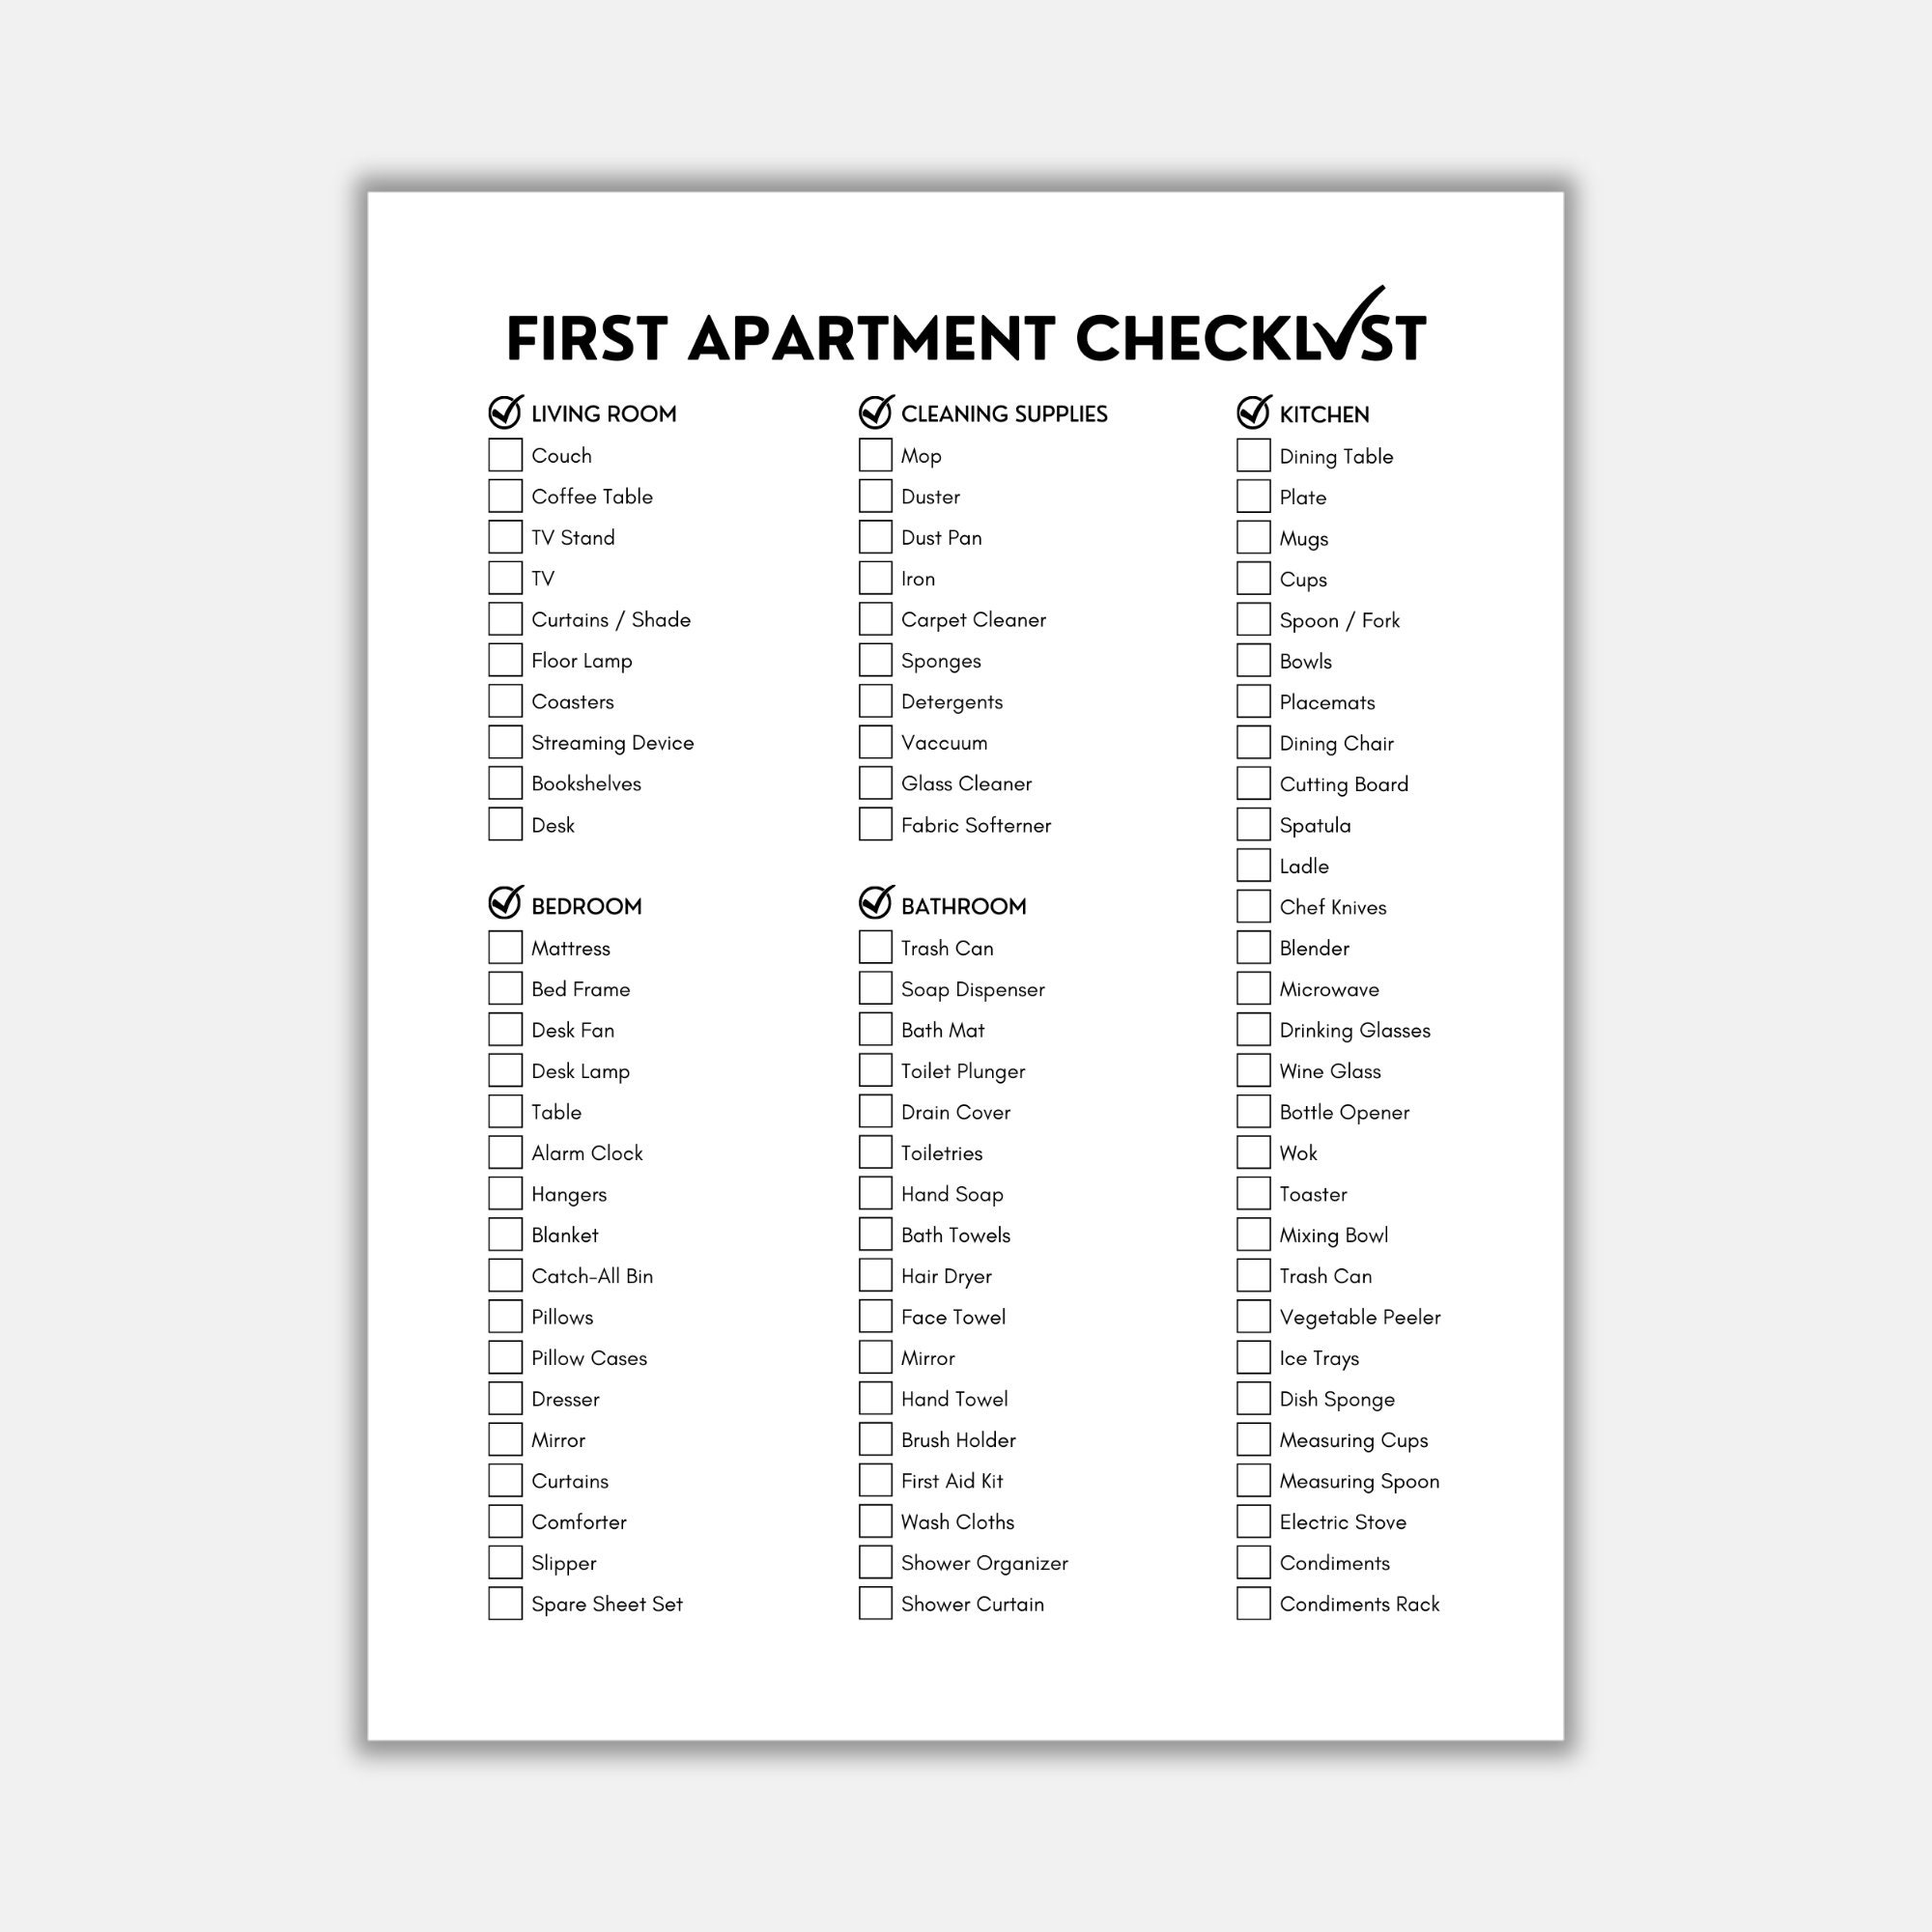 New Home “Must Haves” Checklist